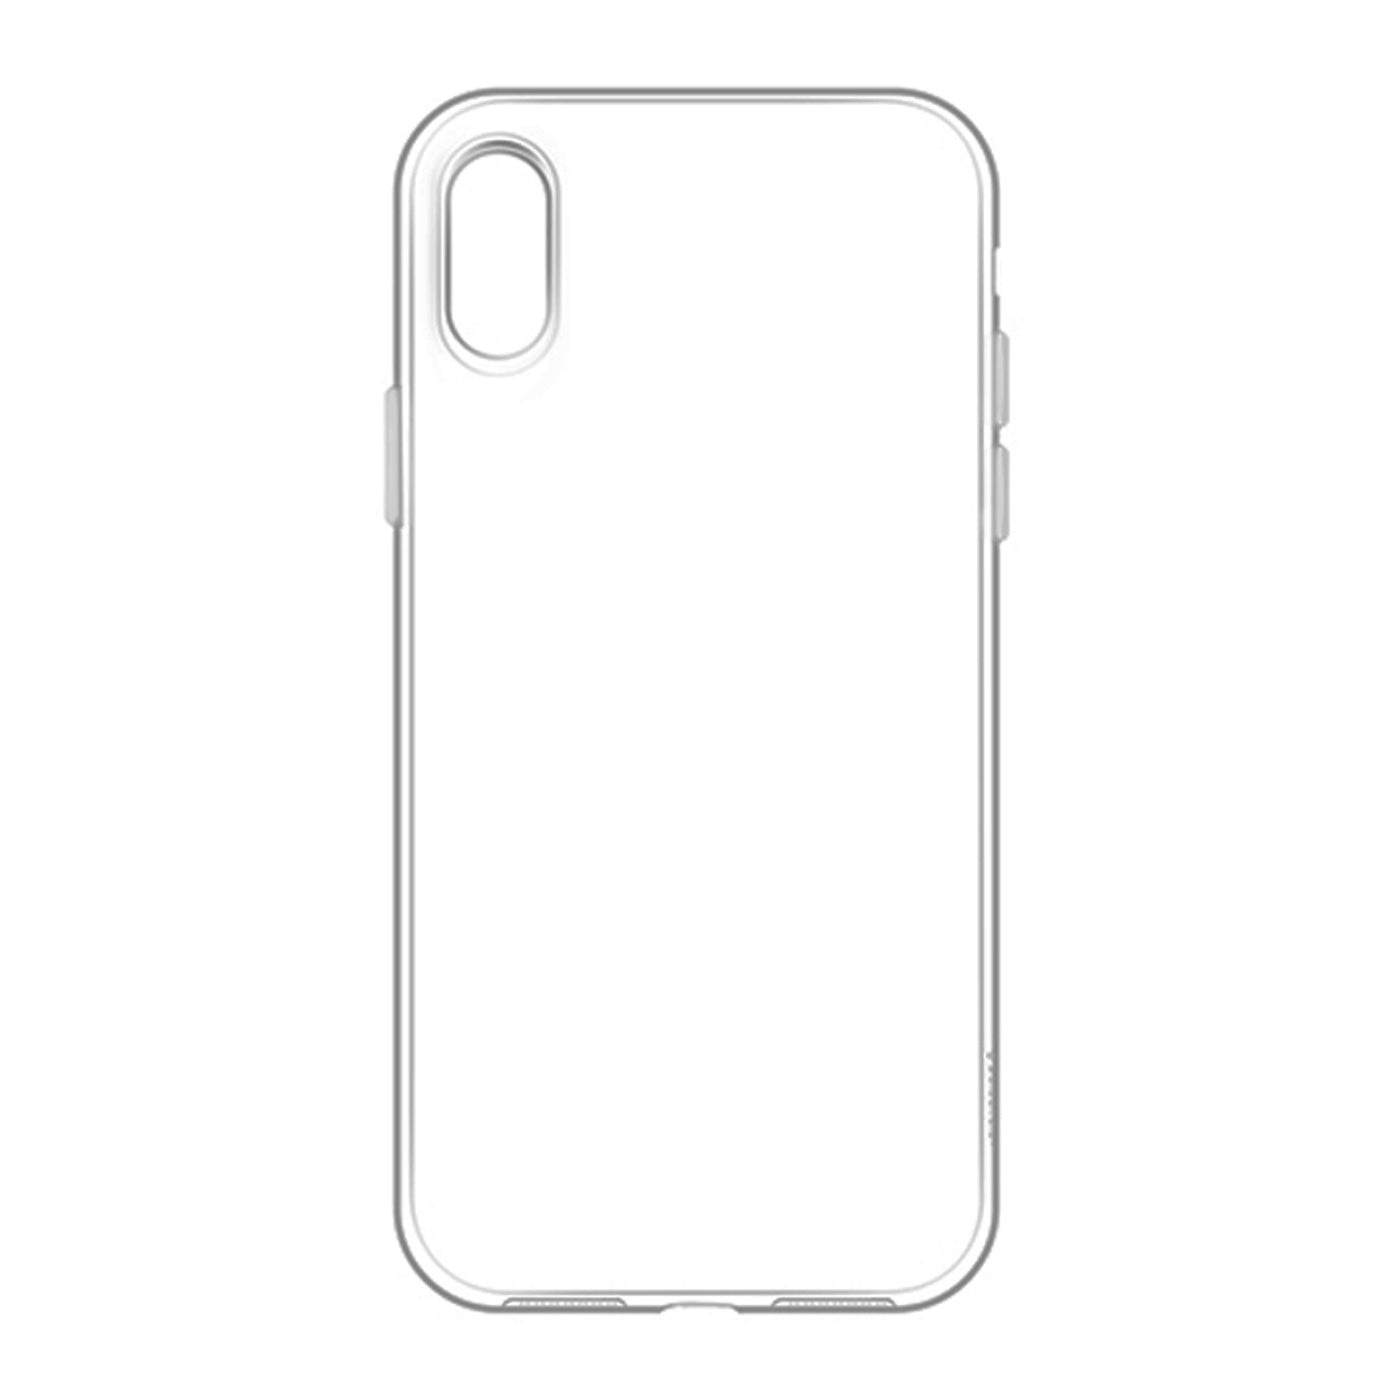 Silicone Phone Case - Clear - Apple iPhone X Clear New - Sealed